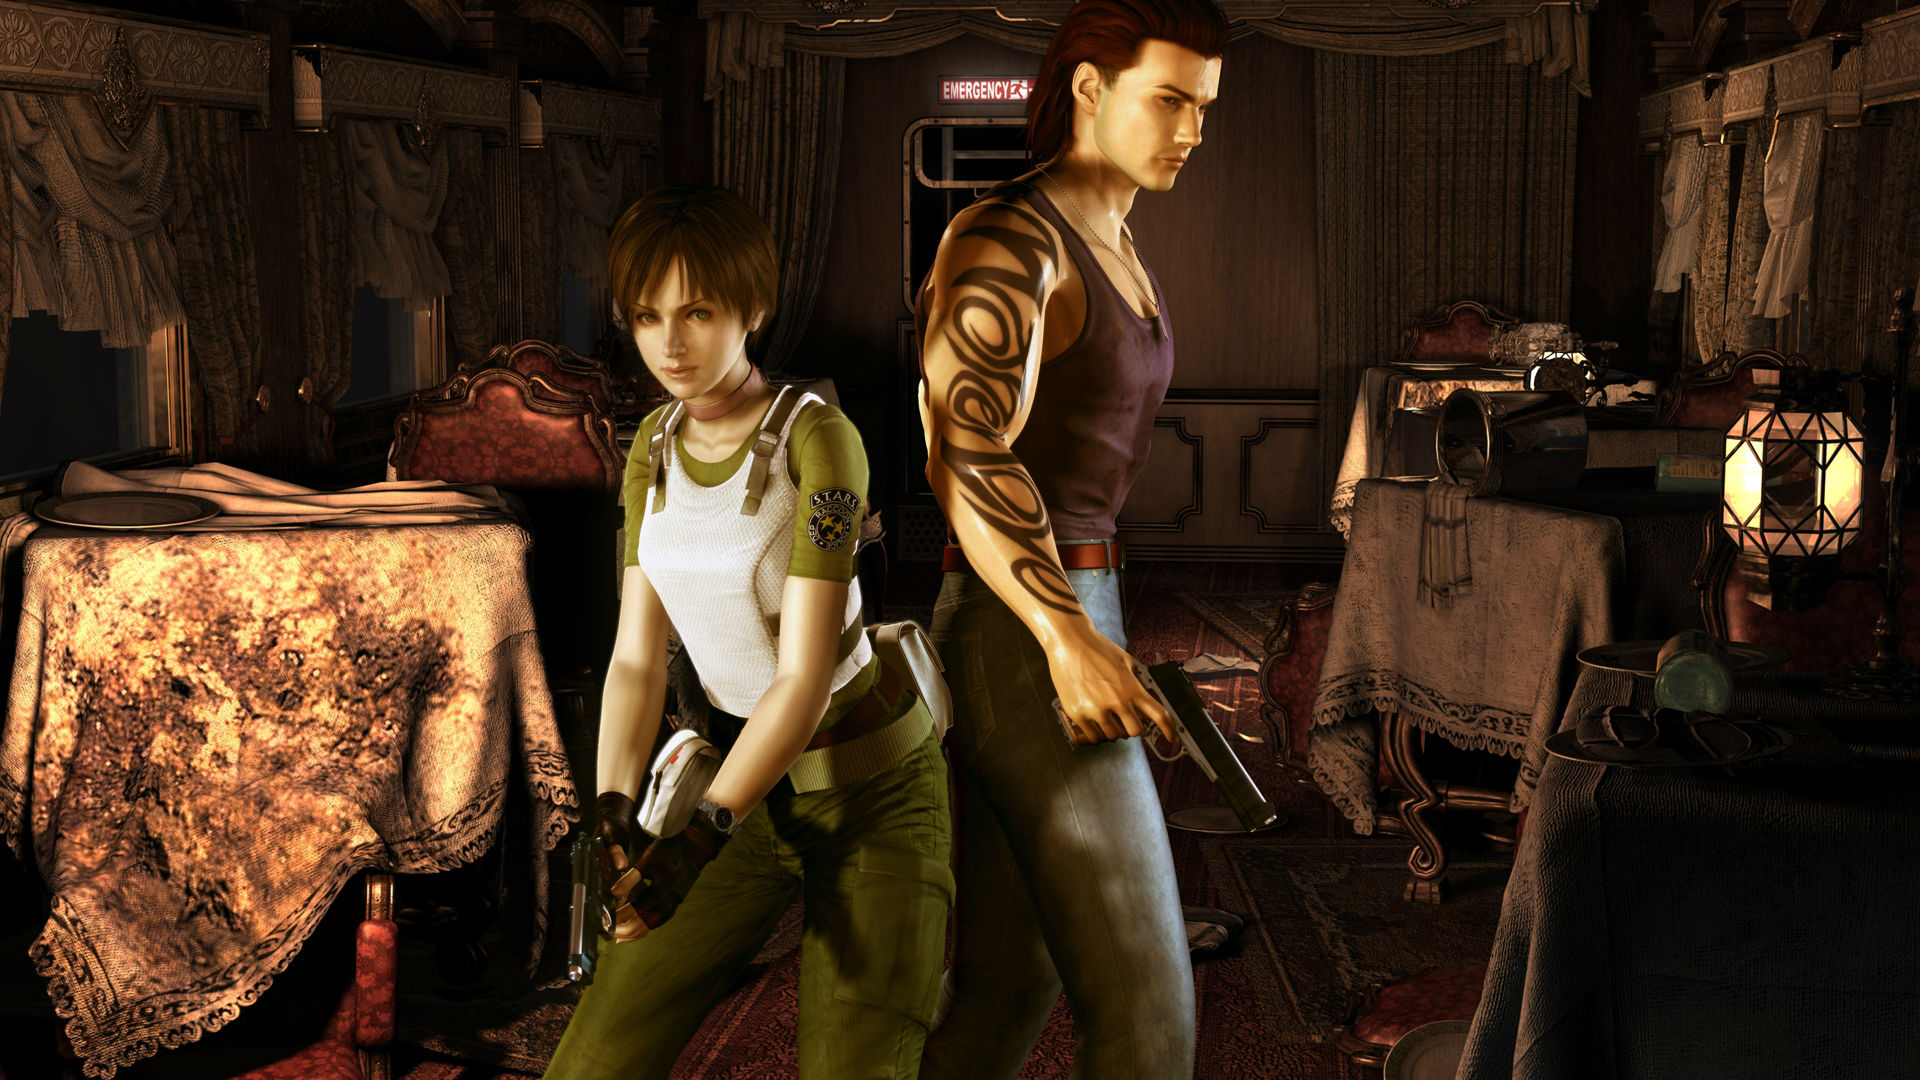 James Marcus (Anderson), Resident Evil Wiki